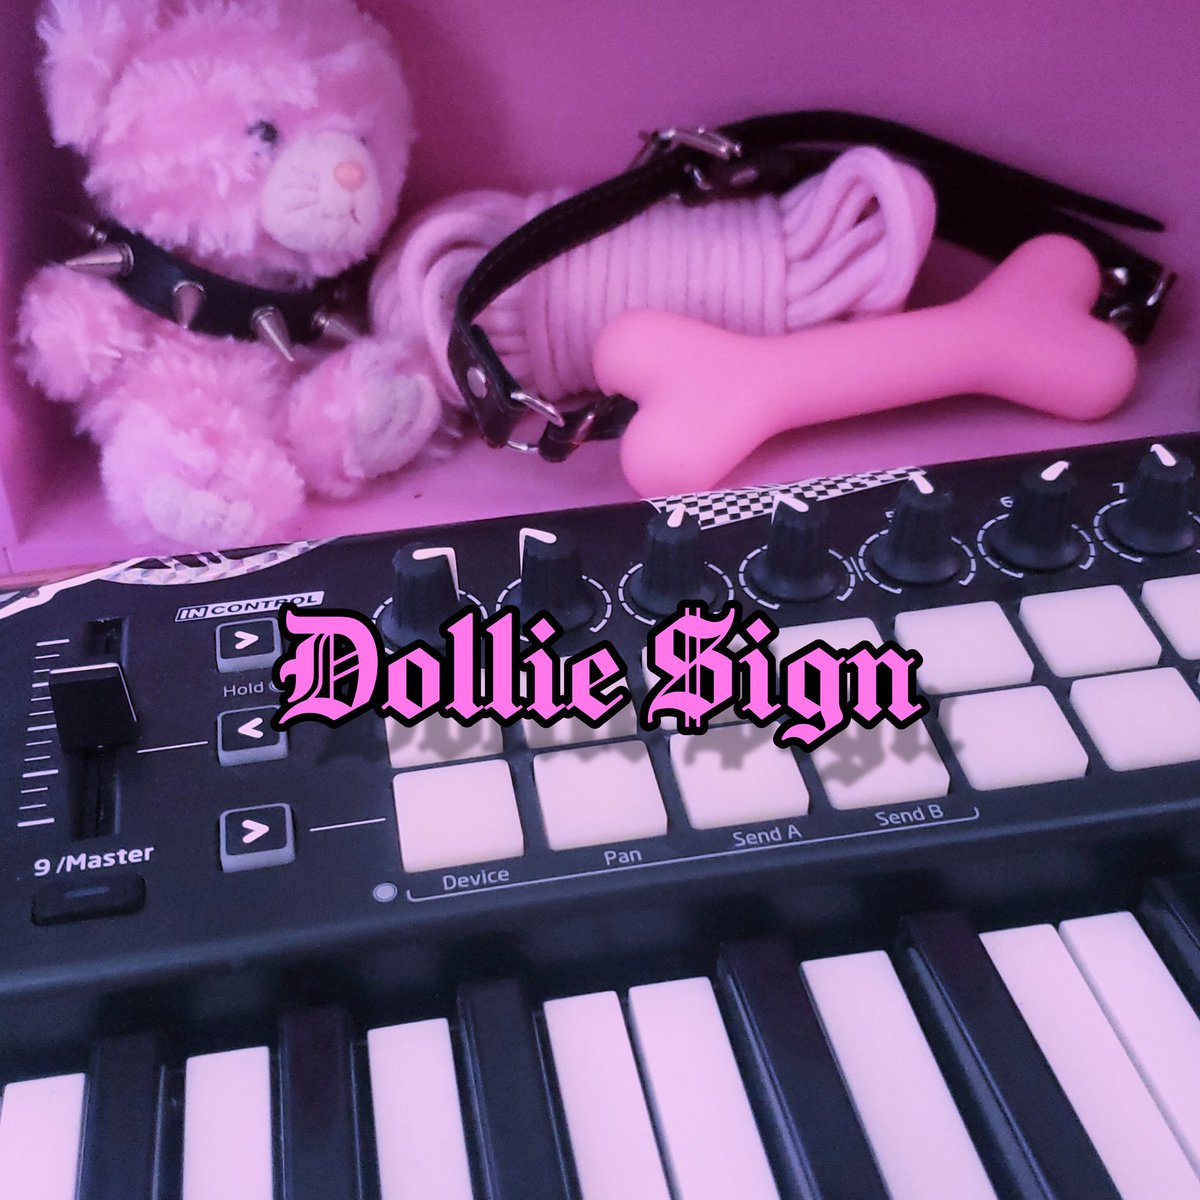 Neww synth and a vocal thingy i did ♡♡ also did a chopped version! Listen to DOLLIE $IGN by DOLLIE BEAR on #SoundCloud on.soundcloud.com/YJBtq